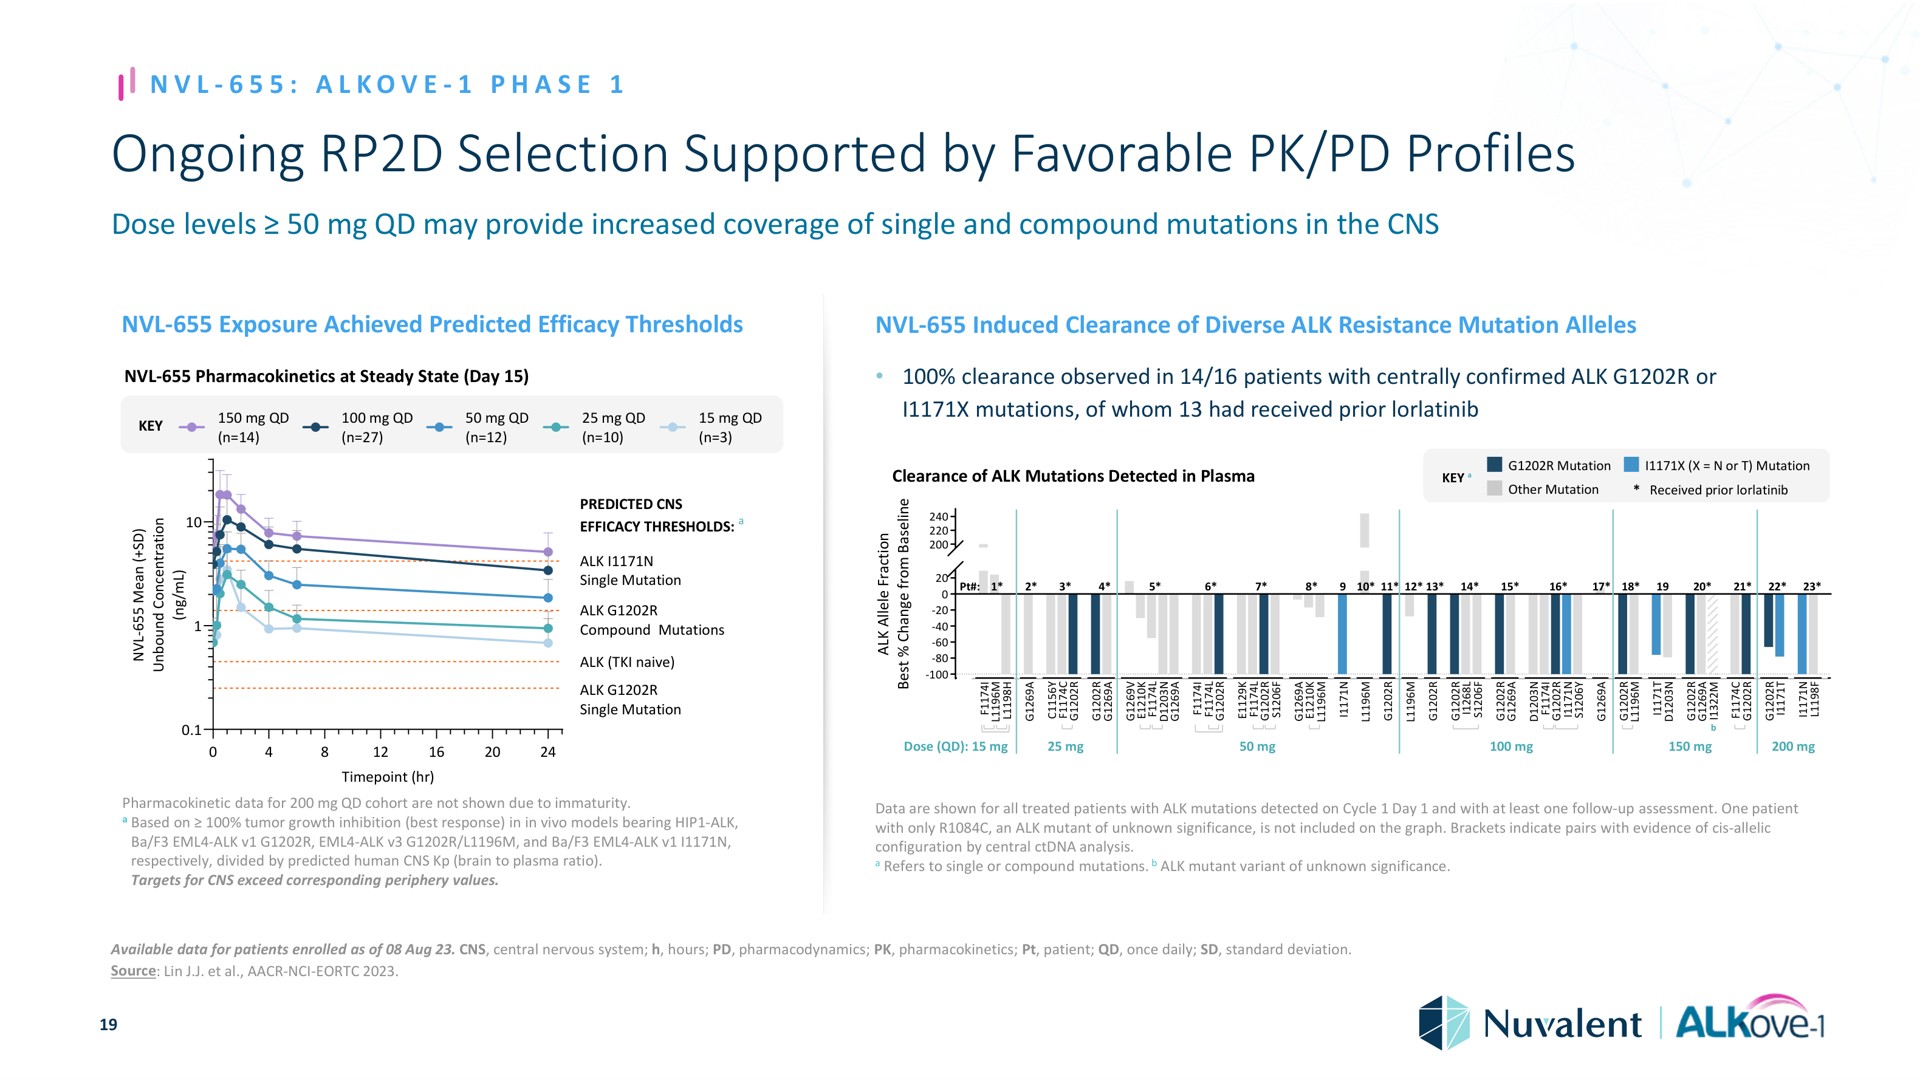 ongoing selection supported by favorable profiles phase dose levels may provide increased coverage of single and compound mutations in the exposure achieved predicted efficacy thresholds induced clearance of diverse alk resistance mutation alleles at steady state day clearance observed in patients with centrally confirmed alk or wat pea mutations of whom had received prior clearance of alk mutations detected in plasma key mutation or mutation seed mutation received i prior a a ase i predicted efficacy thresholds alk single mutation alk compound mutations alk naive alk single mutation as a i a a a at at fat ers sess aas sad aga bad hoy a a ass sea a bots ort i i a dose ere data for cohort are not shown due to immaturity based on tumor growth inhibition best response in in models bearing hip alk alk alk and alk respectively divided predicted human brain to plasma ratio targets for exceed corresponding periphery values data are shown for all treated patients with alk mutations detected on cycle day and with at least one follow up assessment one patient with only an alk mutant of unknown significance is not included on the graph brackets indicate pairs with evidence of allelic configuration central analysis refers to single or compound mutations alk mutant variant of unknown significance available data for patients enrolled as of central nervous system hours pharmacodynamics patient once daily standard deviation source lin | Nuvalent